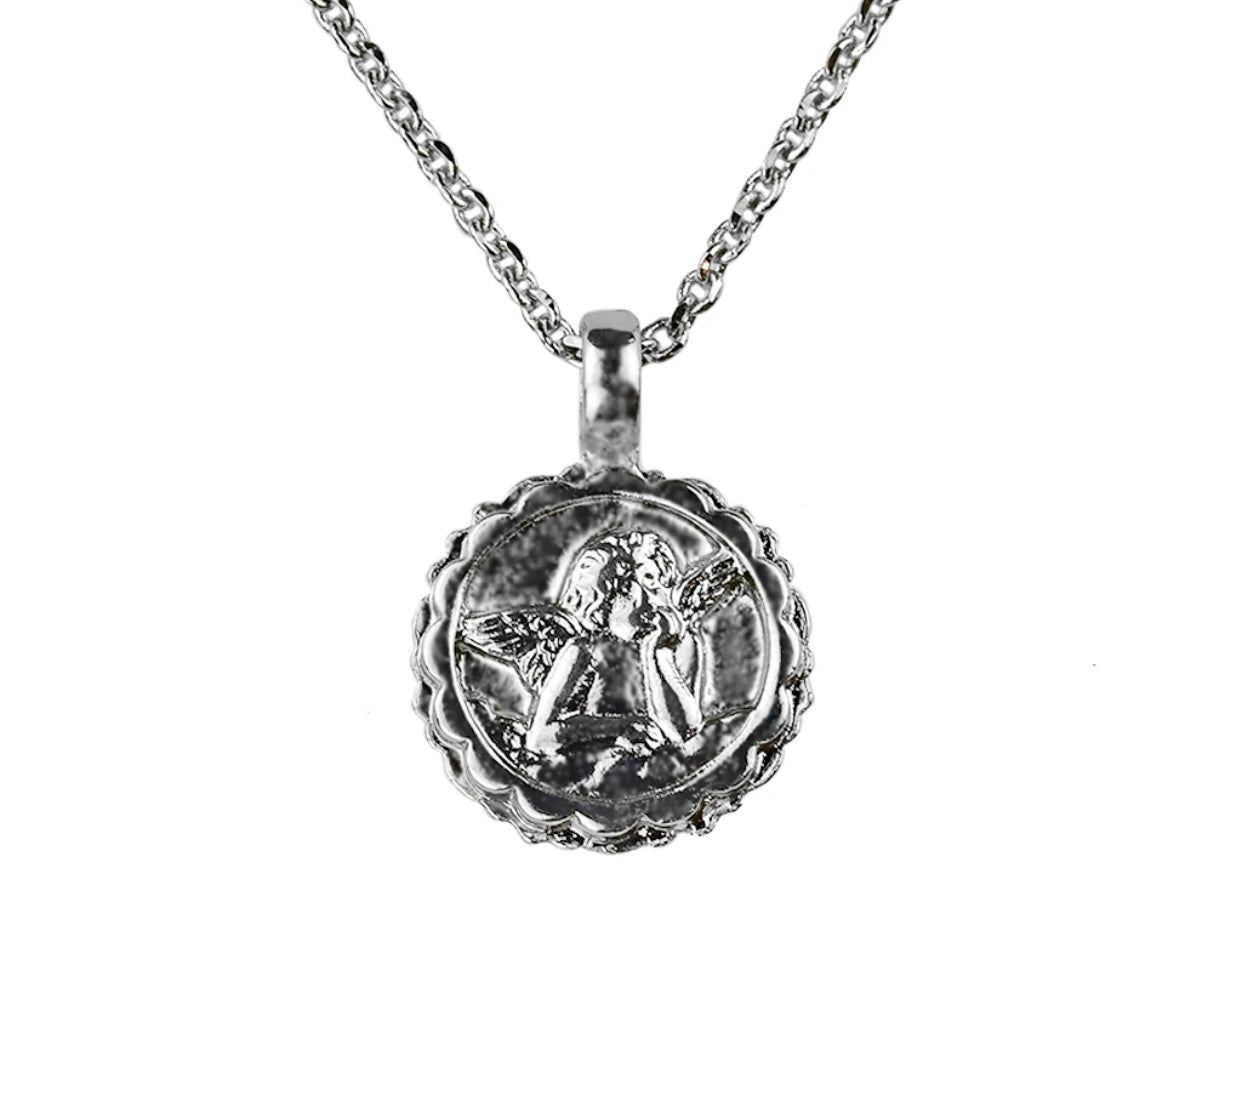 Mariana Antiqued Silver Guardian Angel Necklace in "Tanzanite"